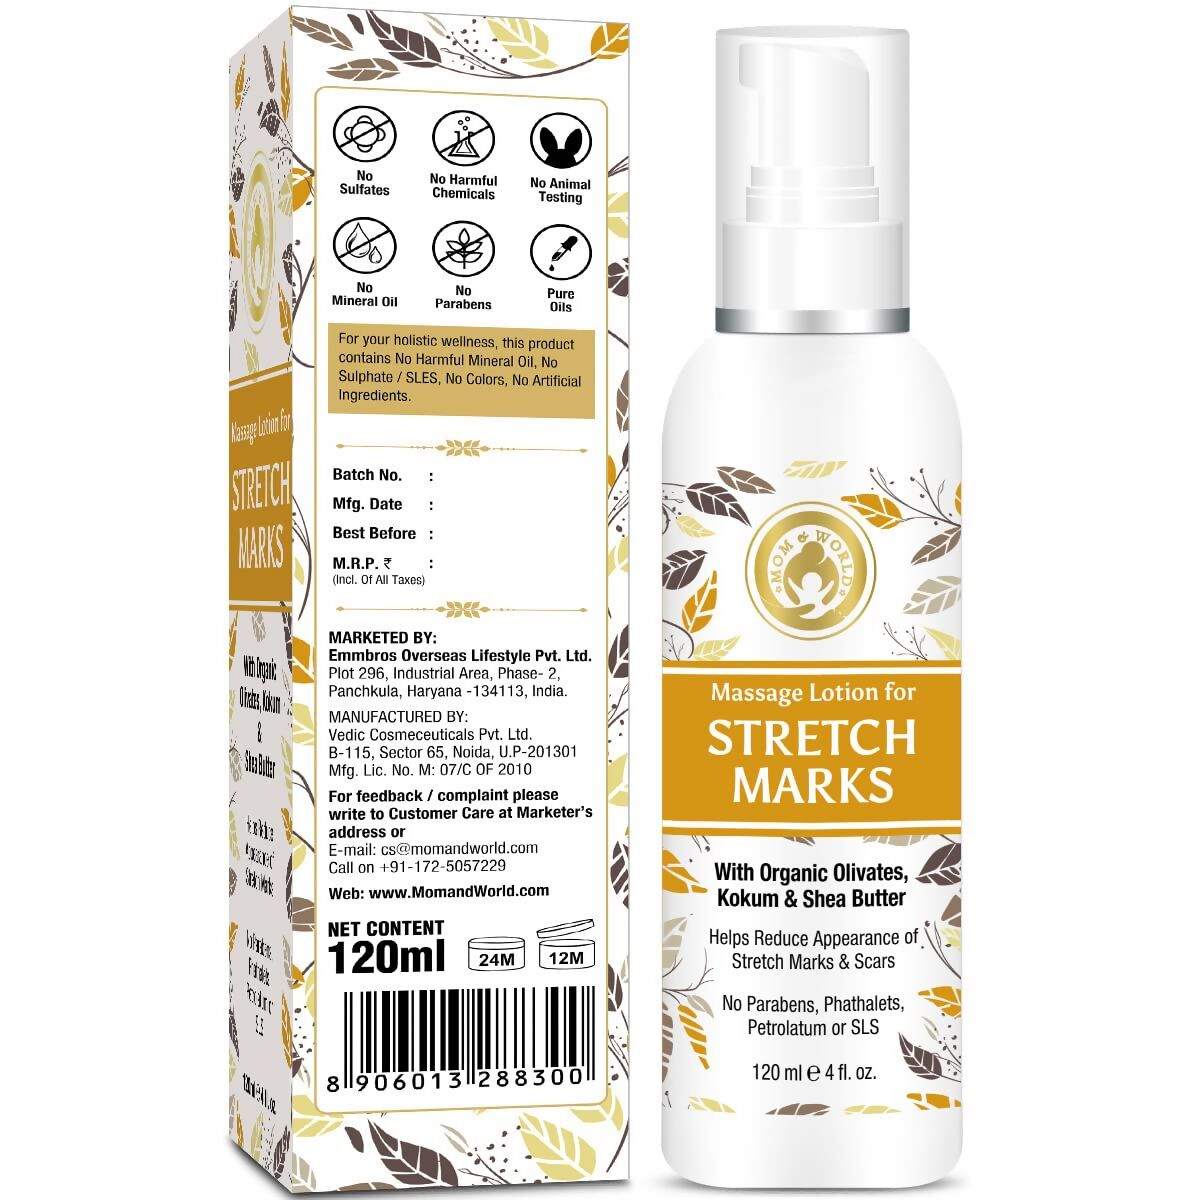 Mom & World Massage Lotion For Stretch Marks - Distacart